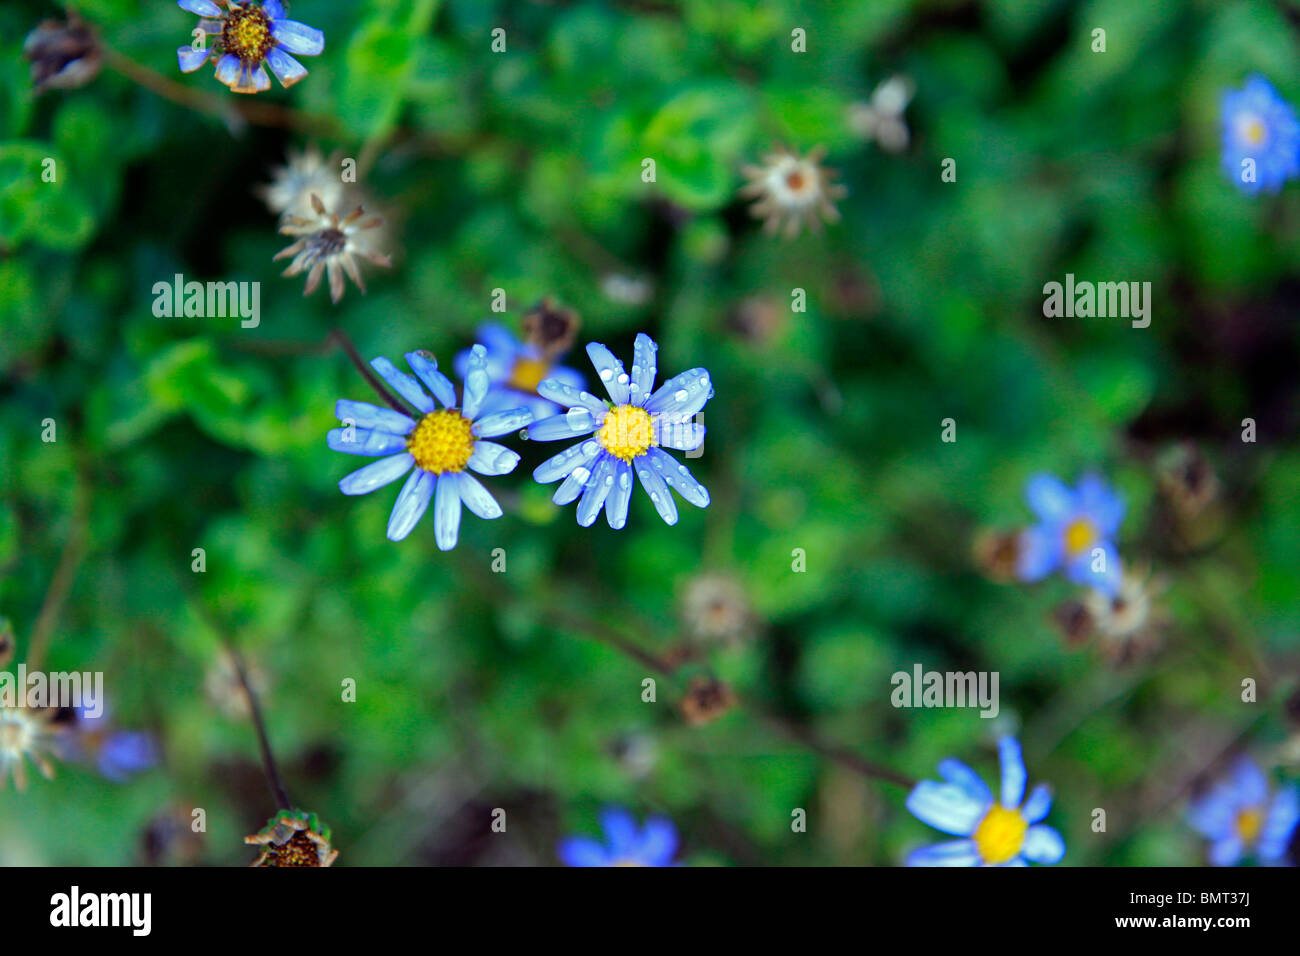 Water droplets on blue daisy flowers, Wild Aster, (Felicia aethiopica) in Kirstenbosch National Botanical Gardens, Cape Town, South Africa. Stock Photo